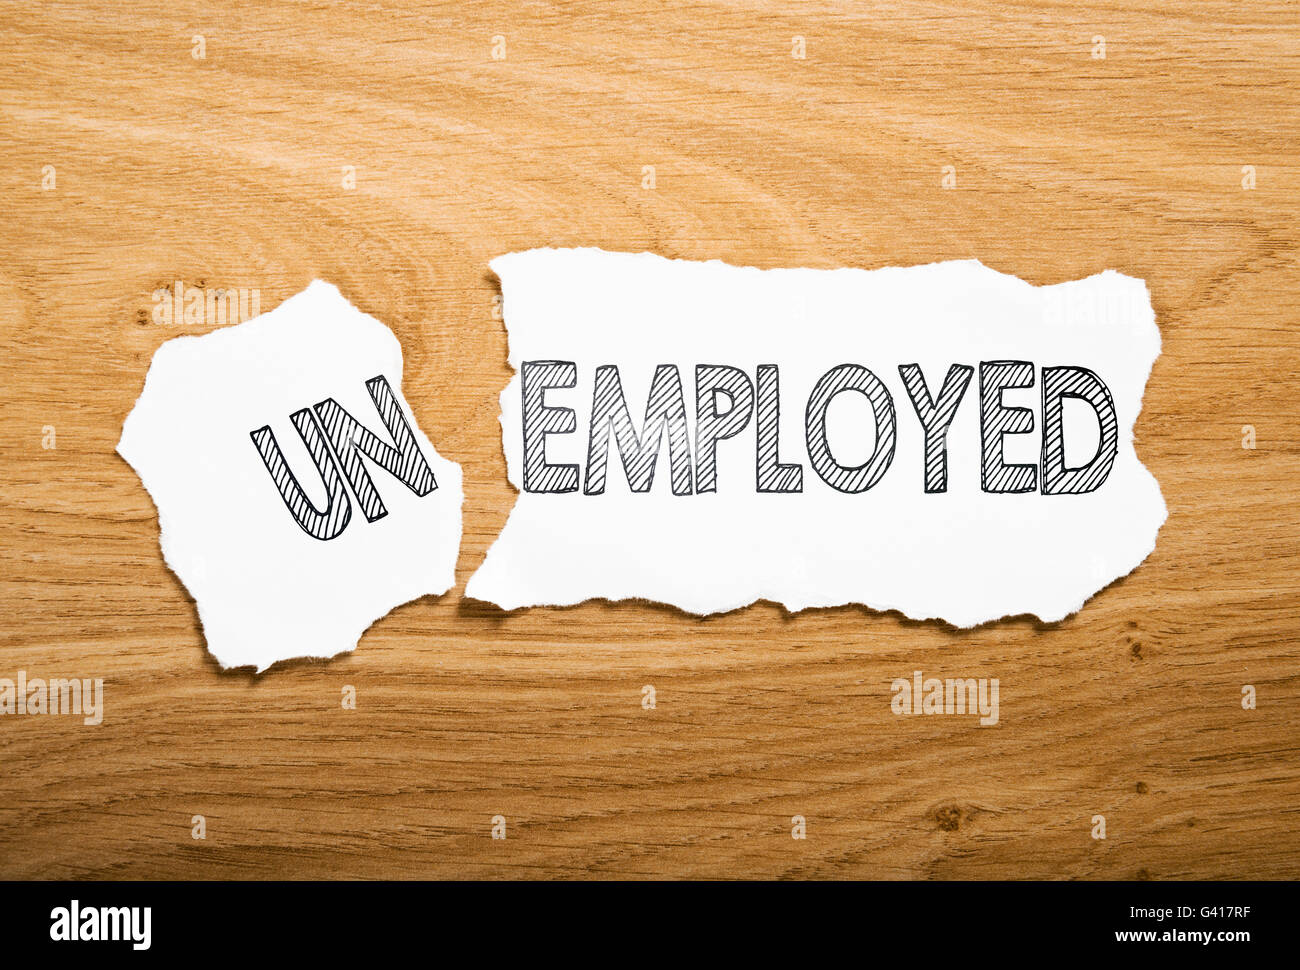 unemployed or employed: two pieces torn paper with opposite messages Stock Photo